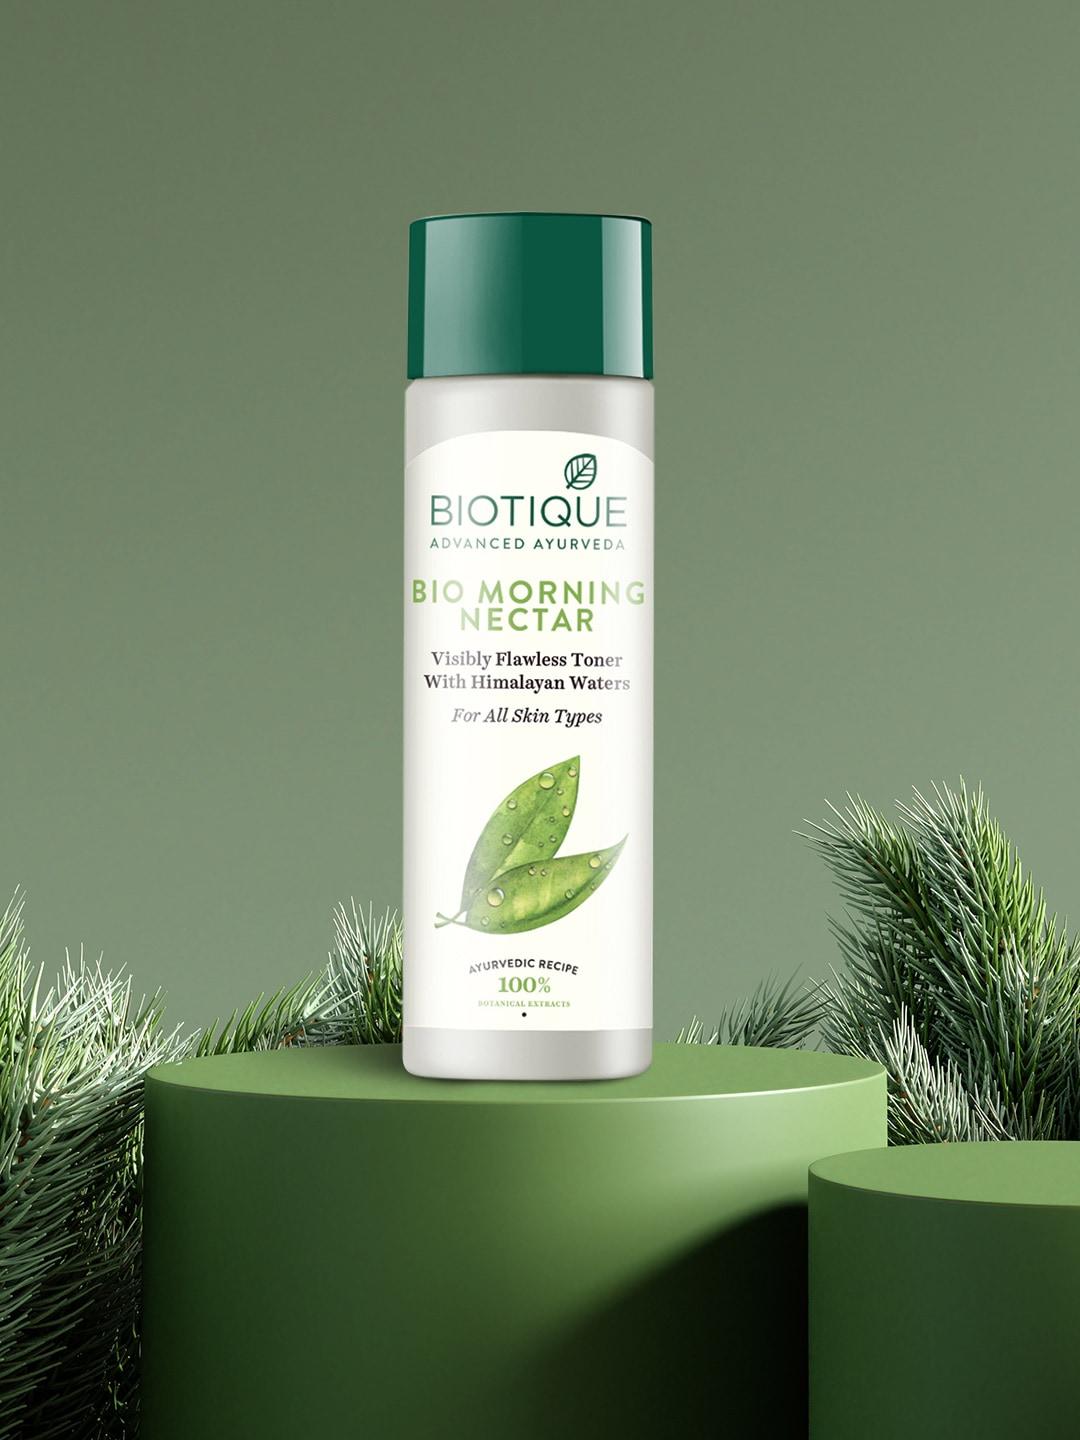 biotique-bio-morning-nectar-visibly-flawless-toner-with-himalayan-waters-120-ml